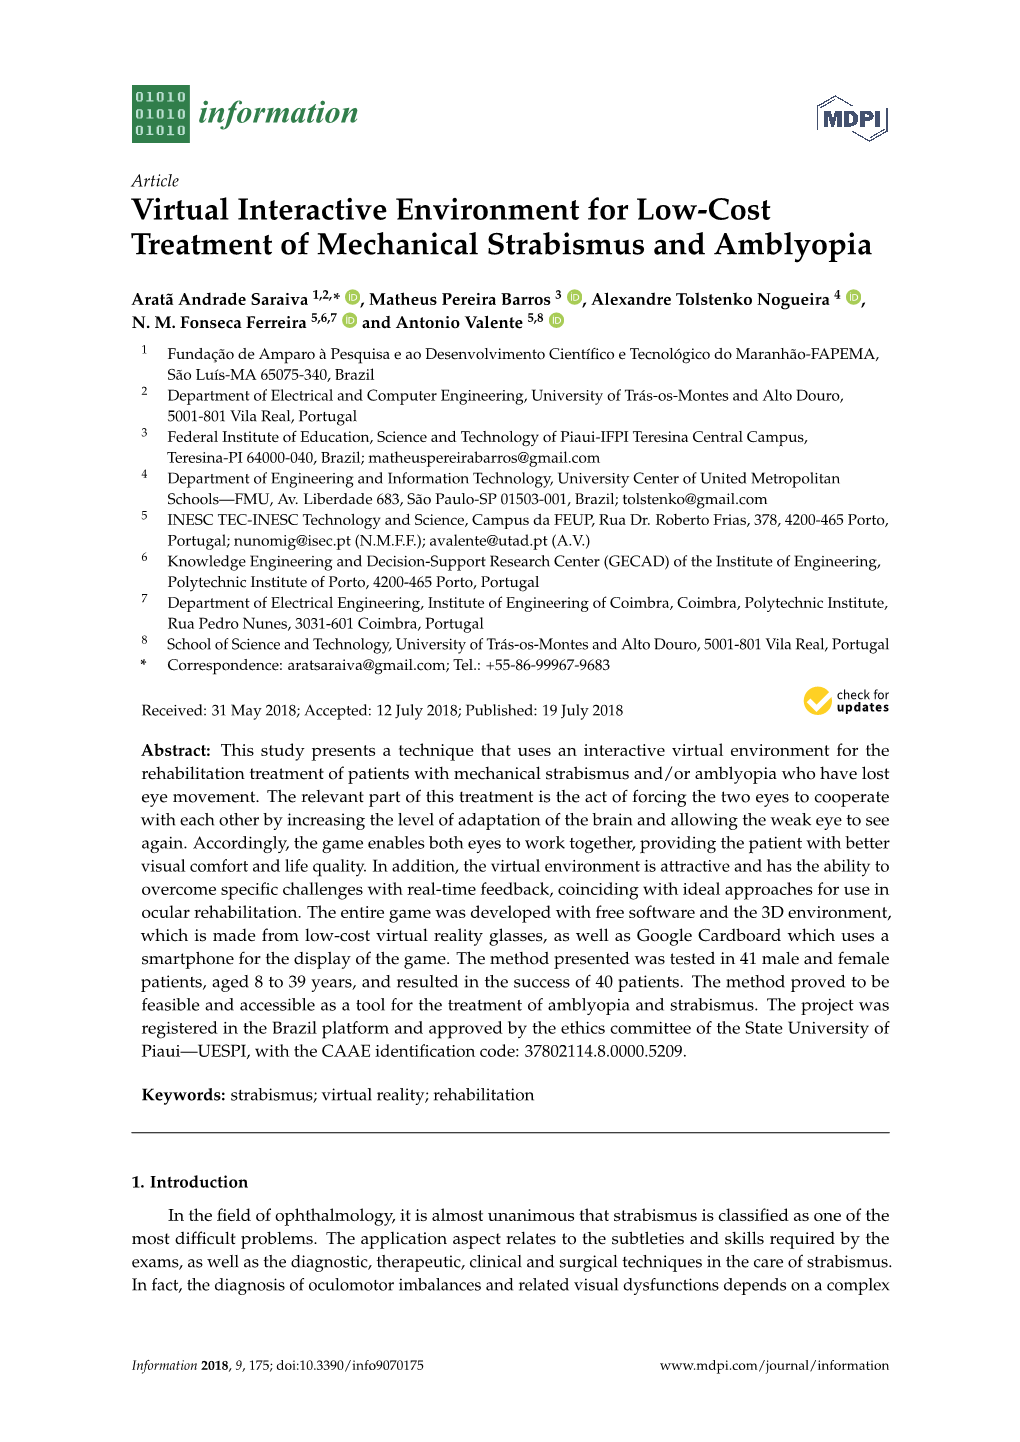 Virtual Interactive Environment for Low-Cost Treatment of Mechanical Strabismus and Amblyopia